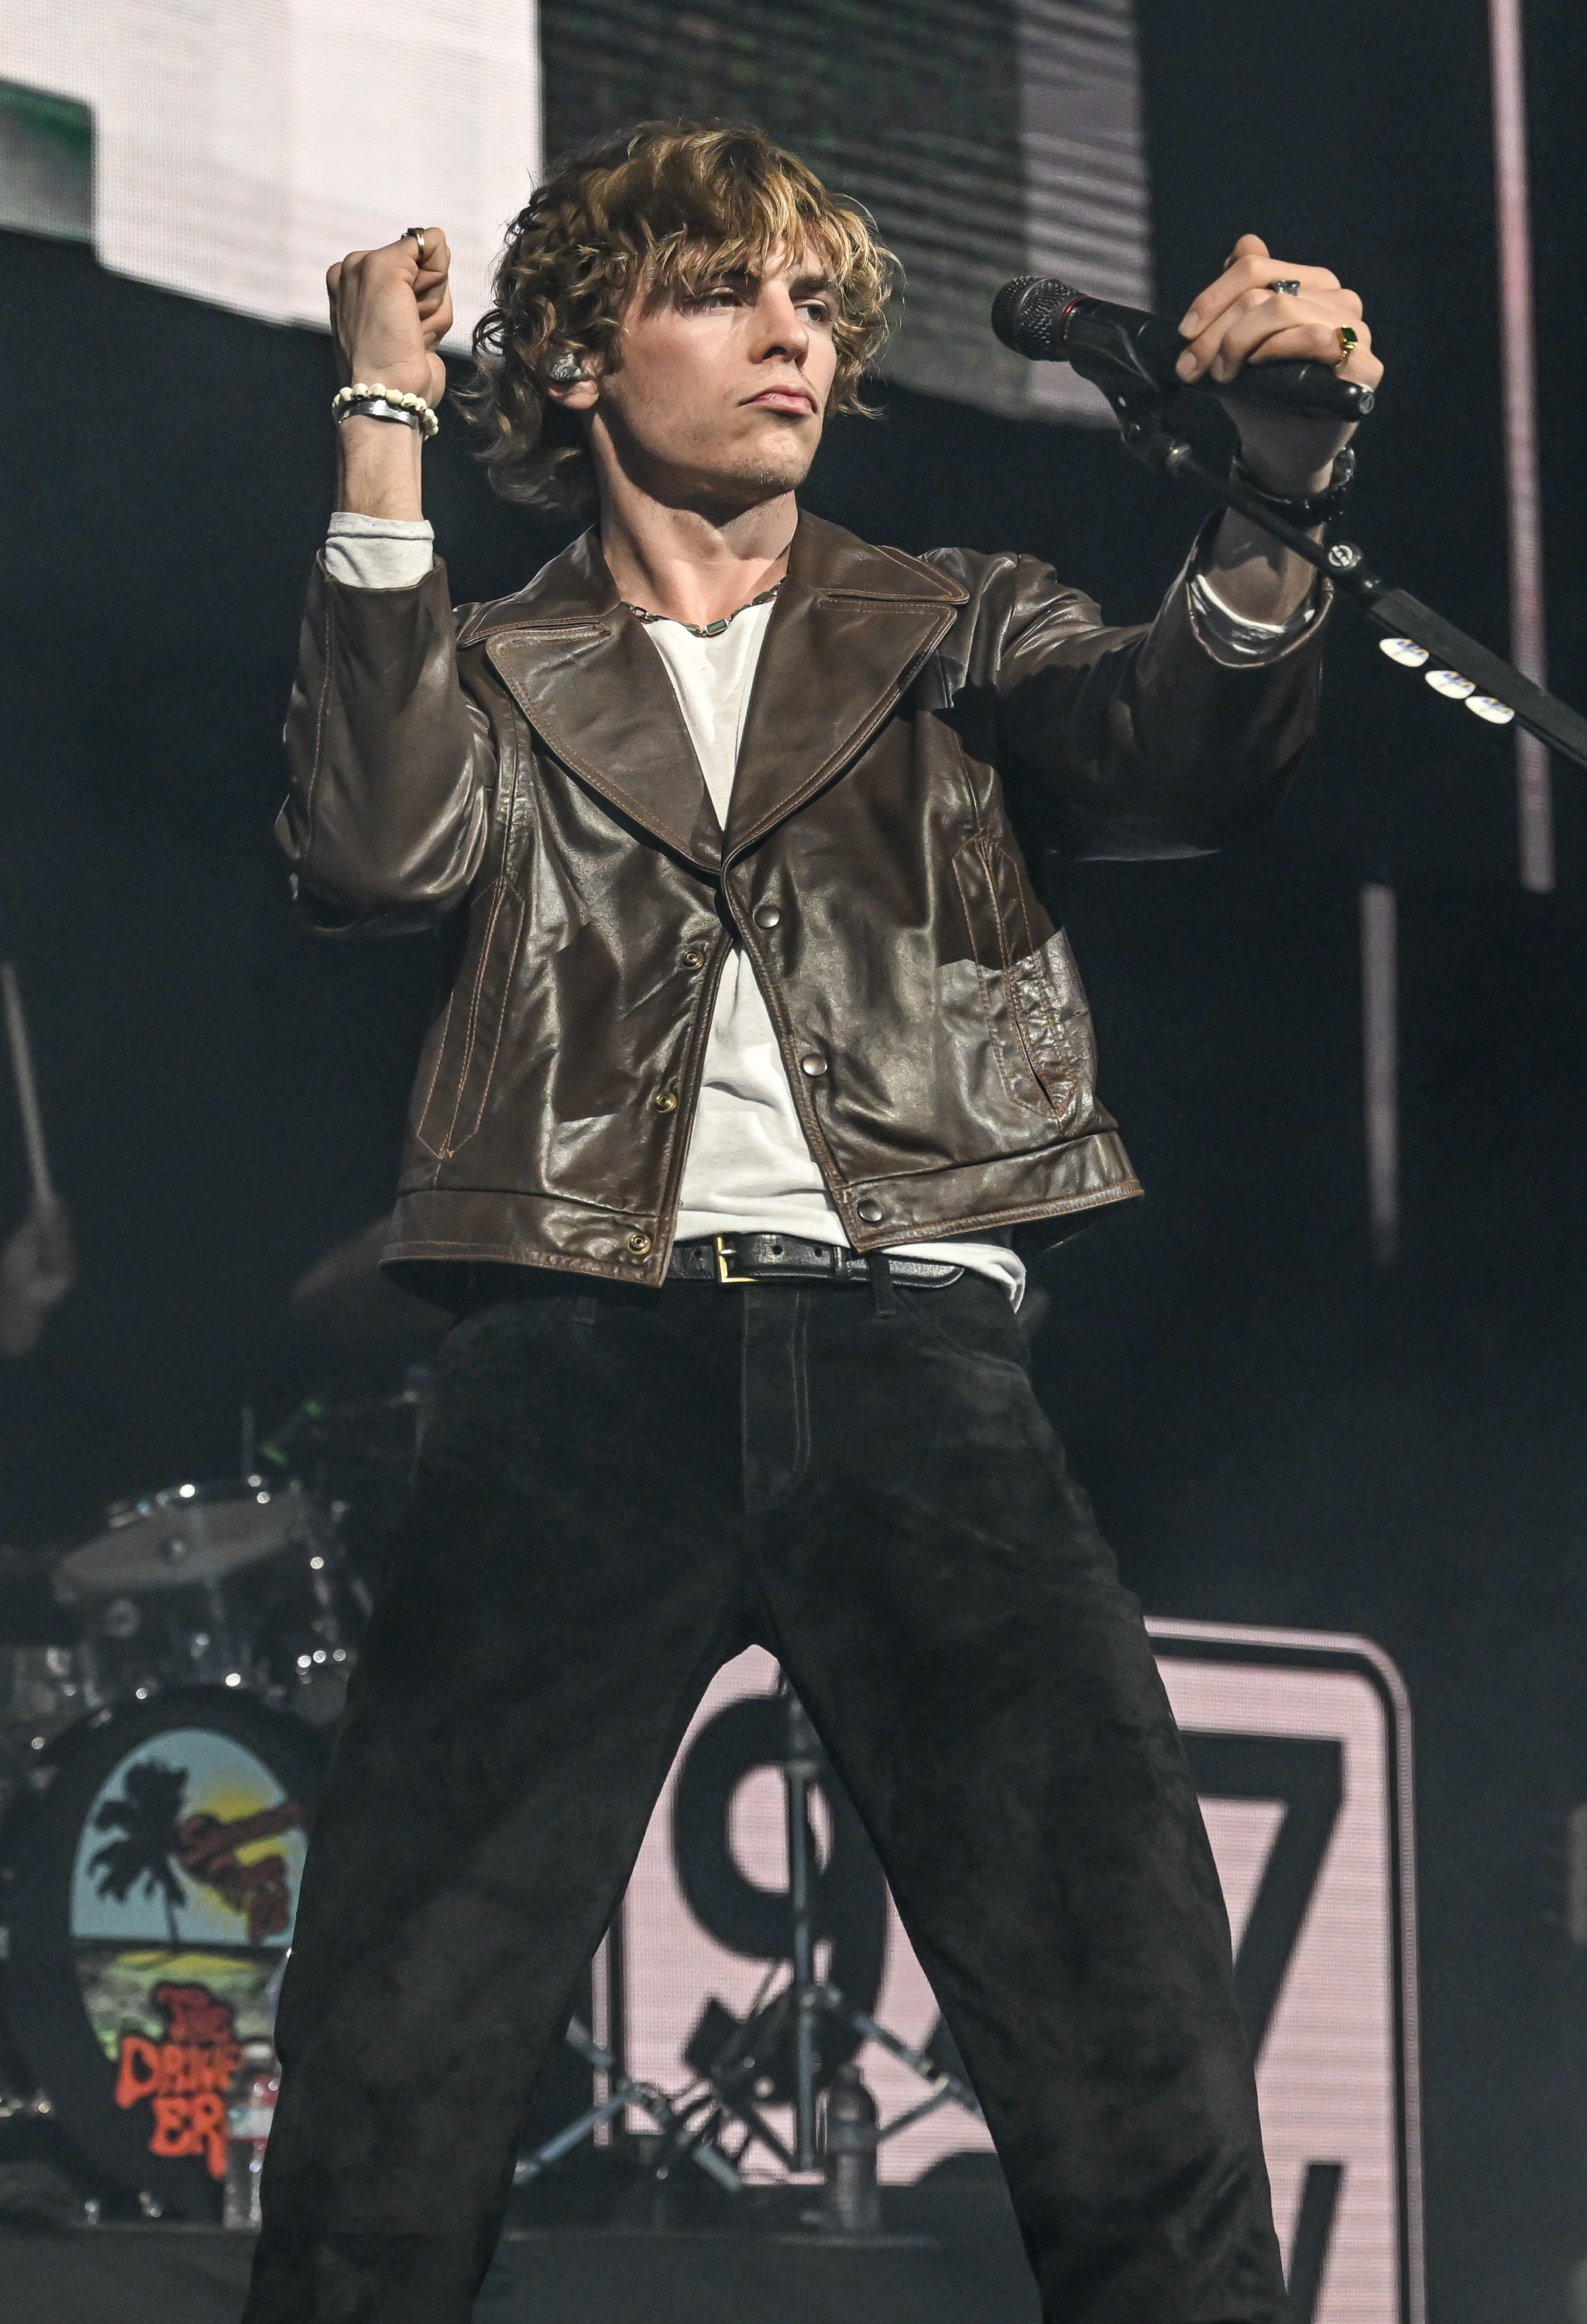 Ross Lynch performing on stage